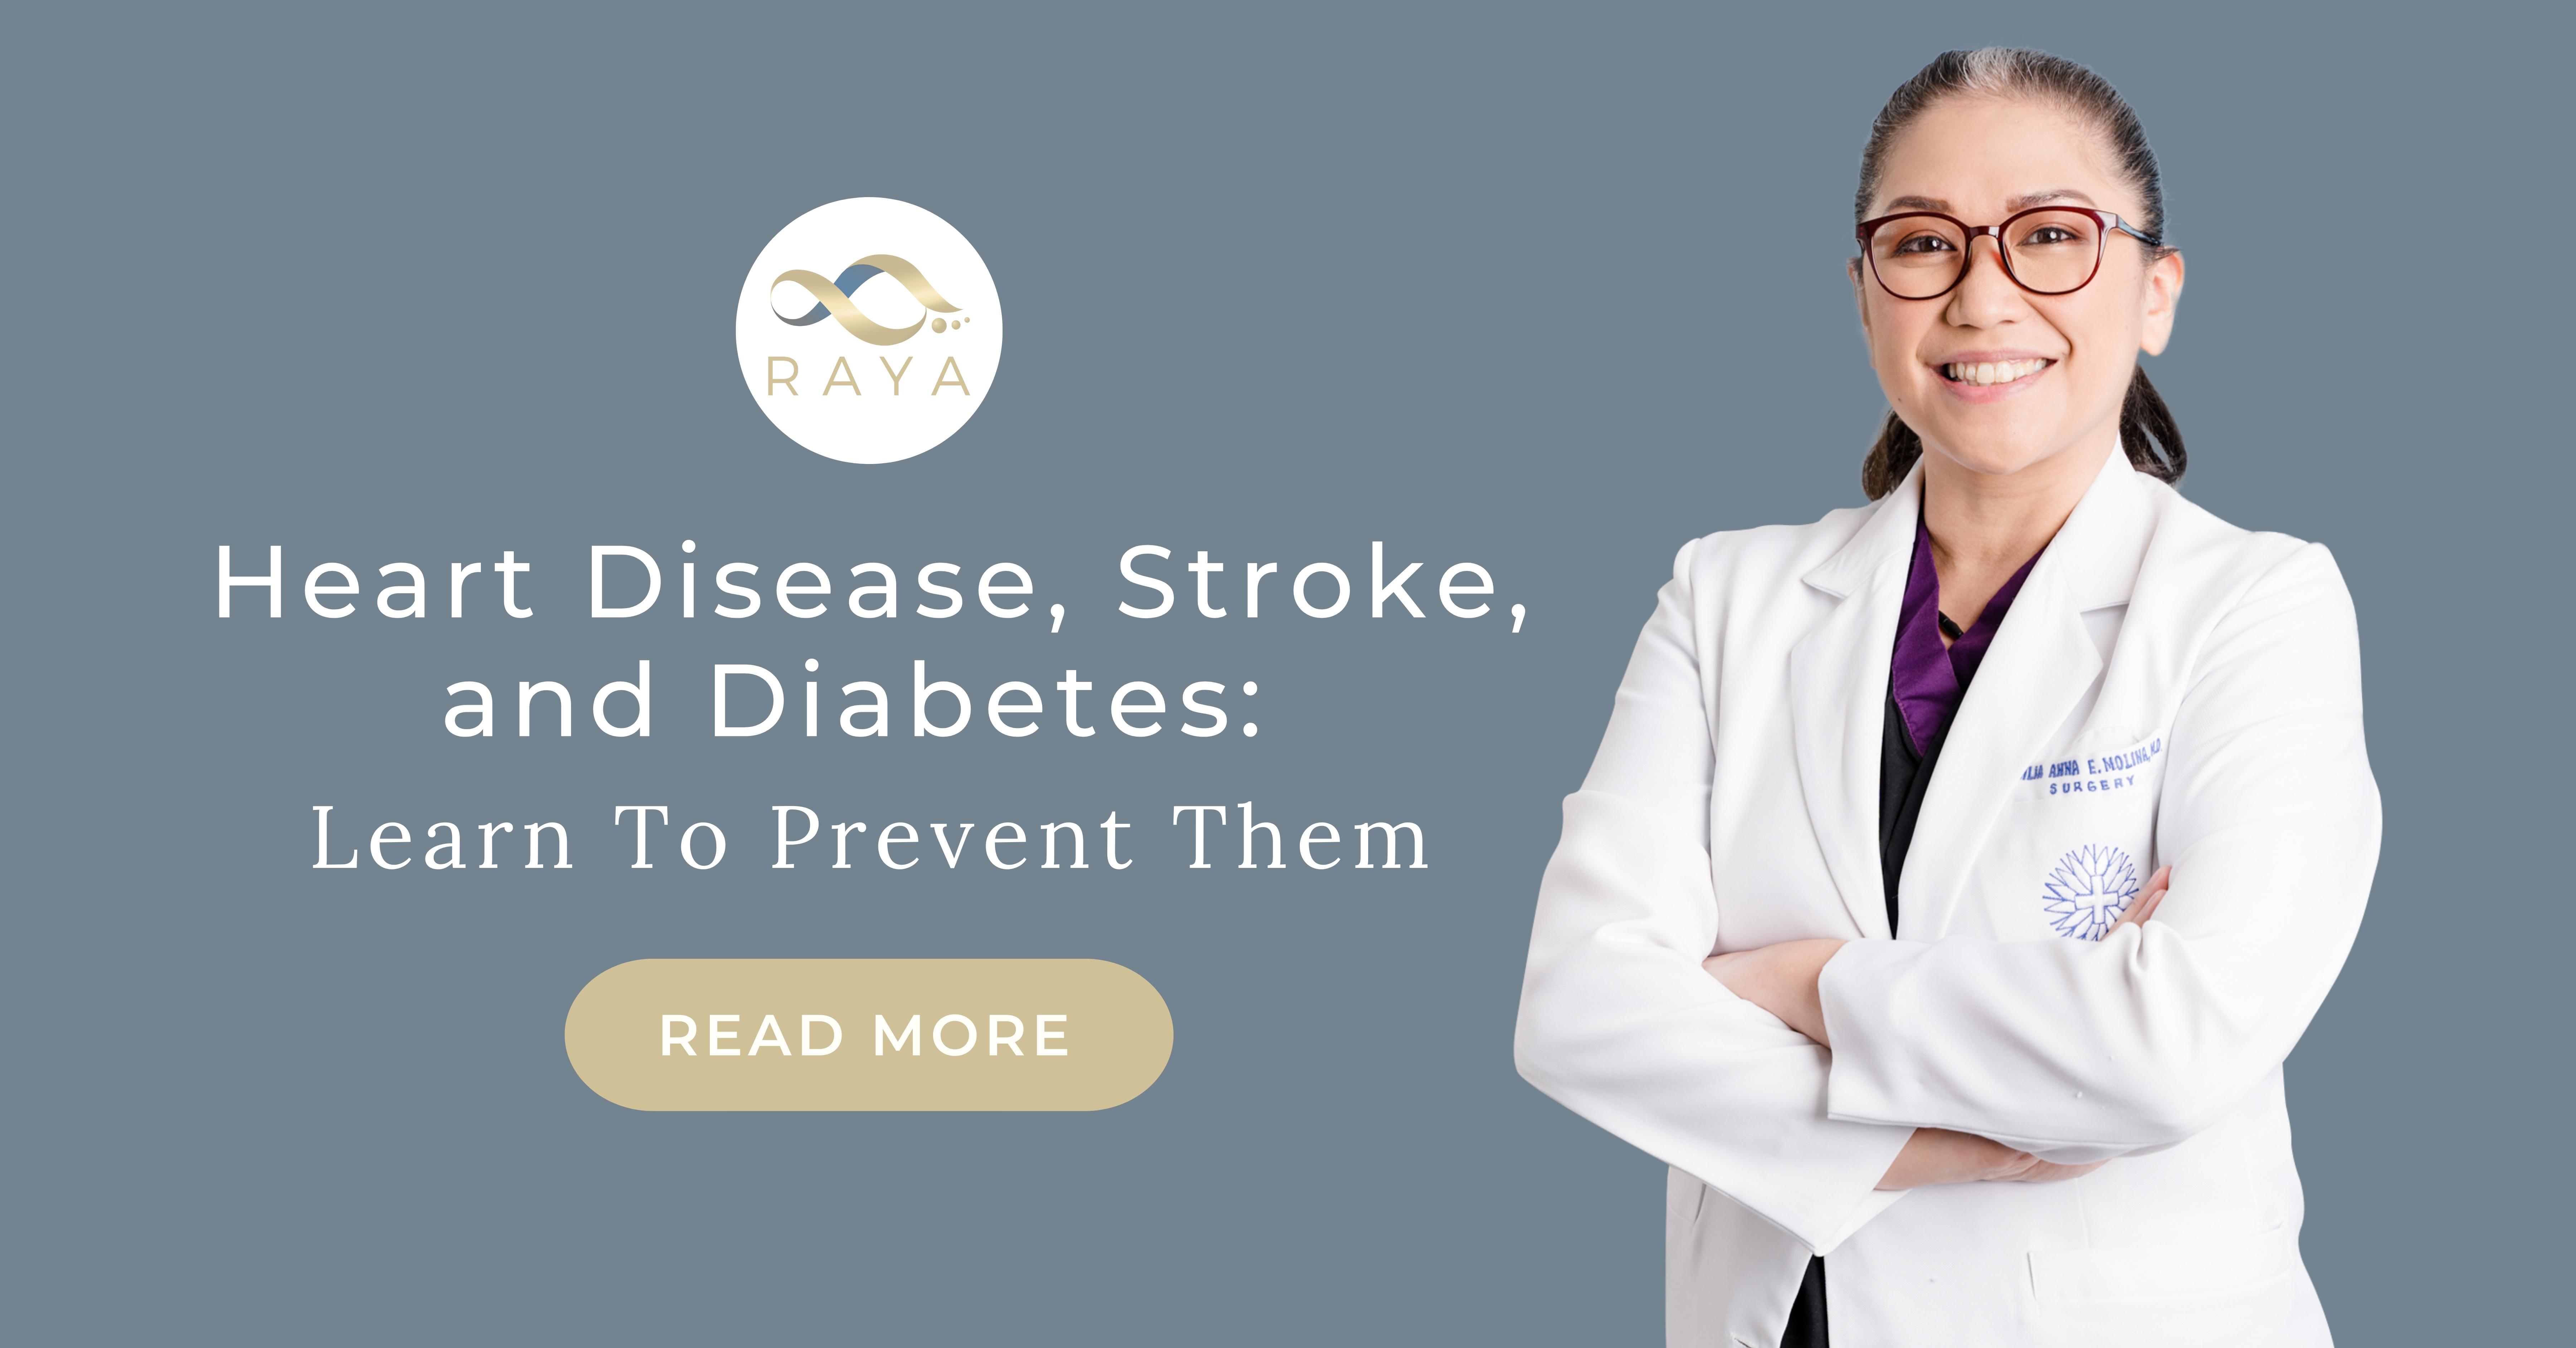 Heart Disease, Stroke, And Diabetes: Learn To Prevent Them